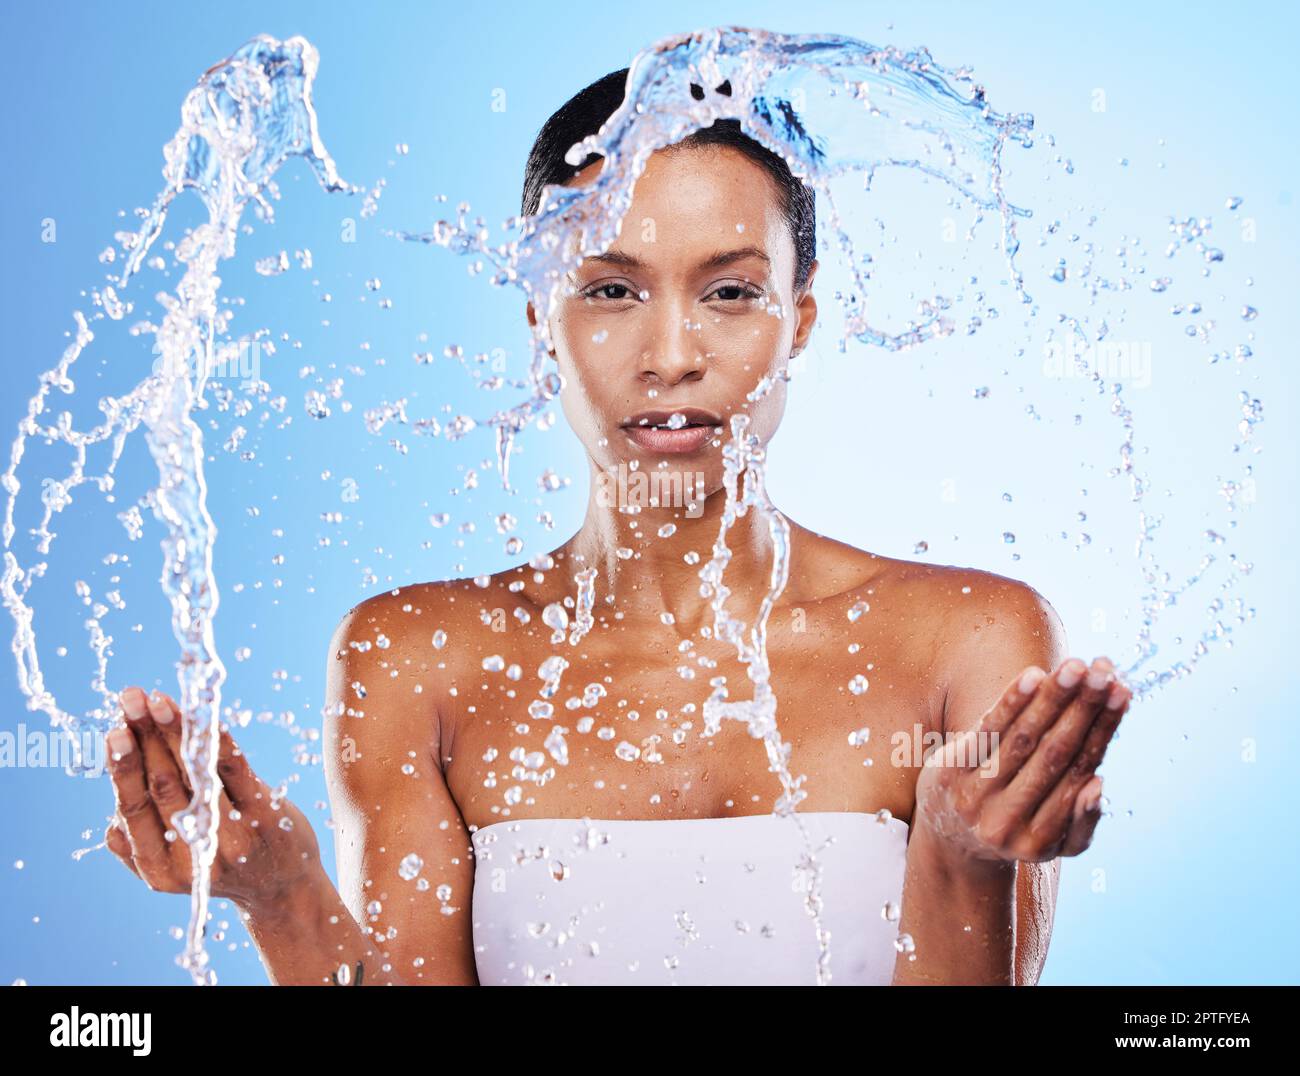 Clean, beauty and water splash with black woman in shower and grooming portrait against blue studio background. Hygiene, fresh and water with splash f Stock Photo